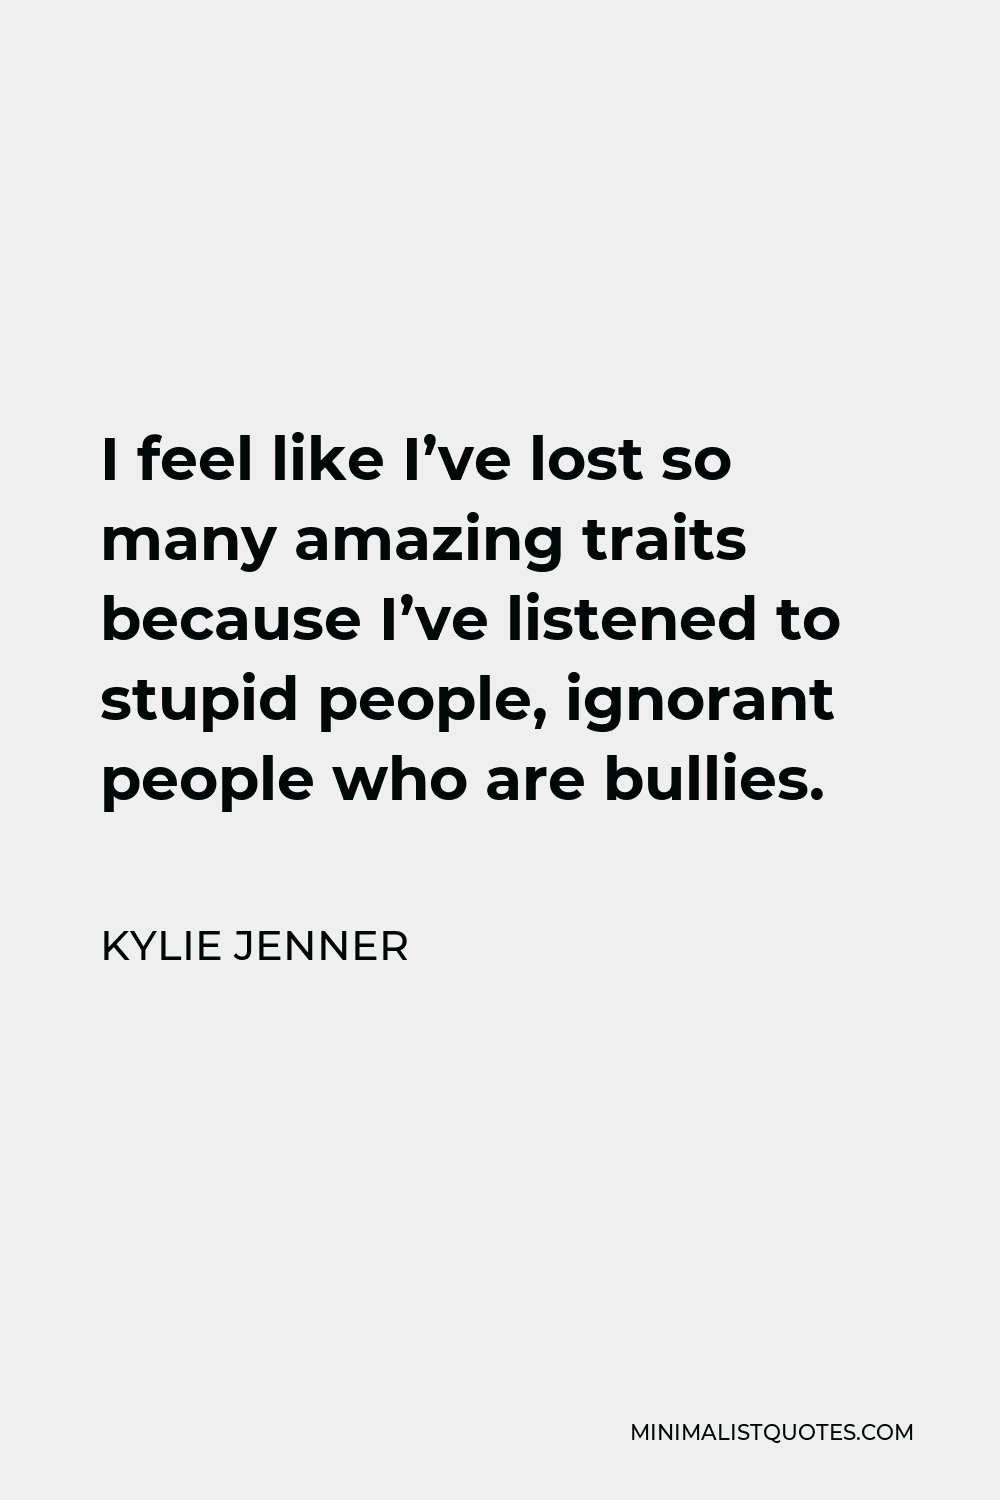 Kylie Jenner Quote - I feel like I’ve lost so many amazing traits because I’ve listened to stupid people, ignorant people who are bullies.